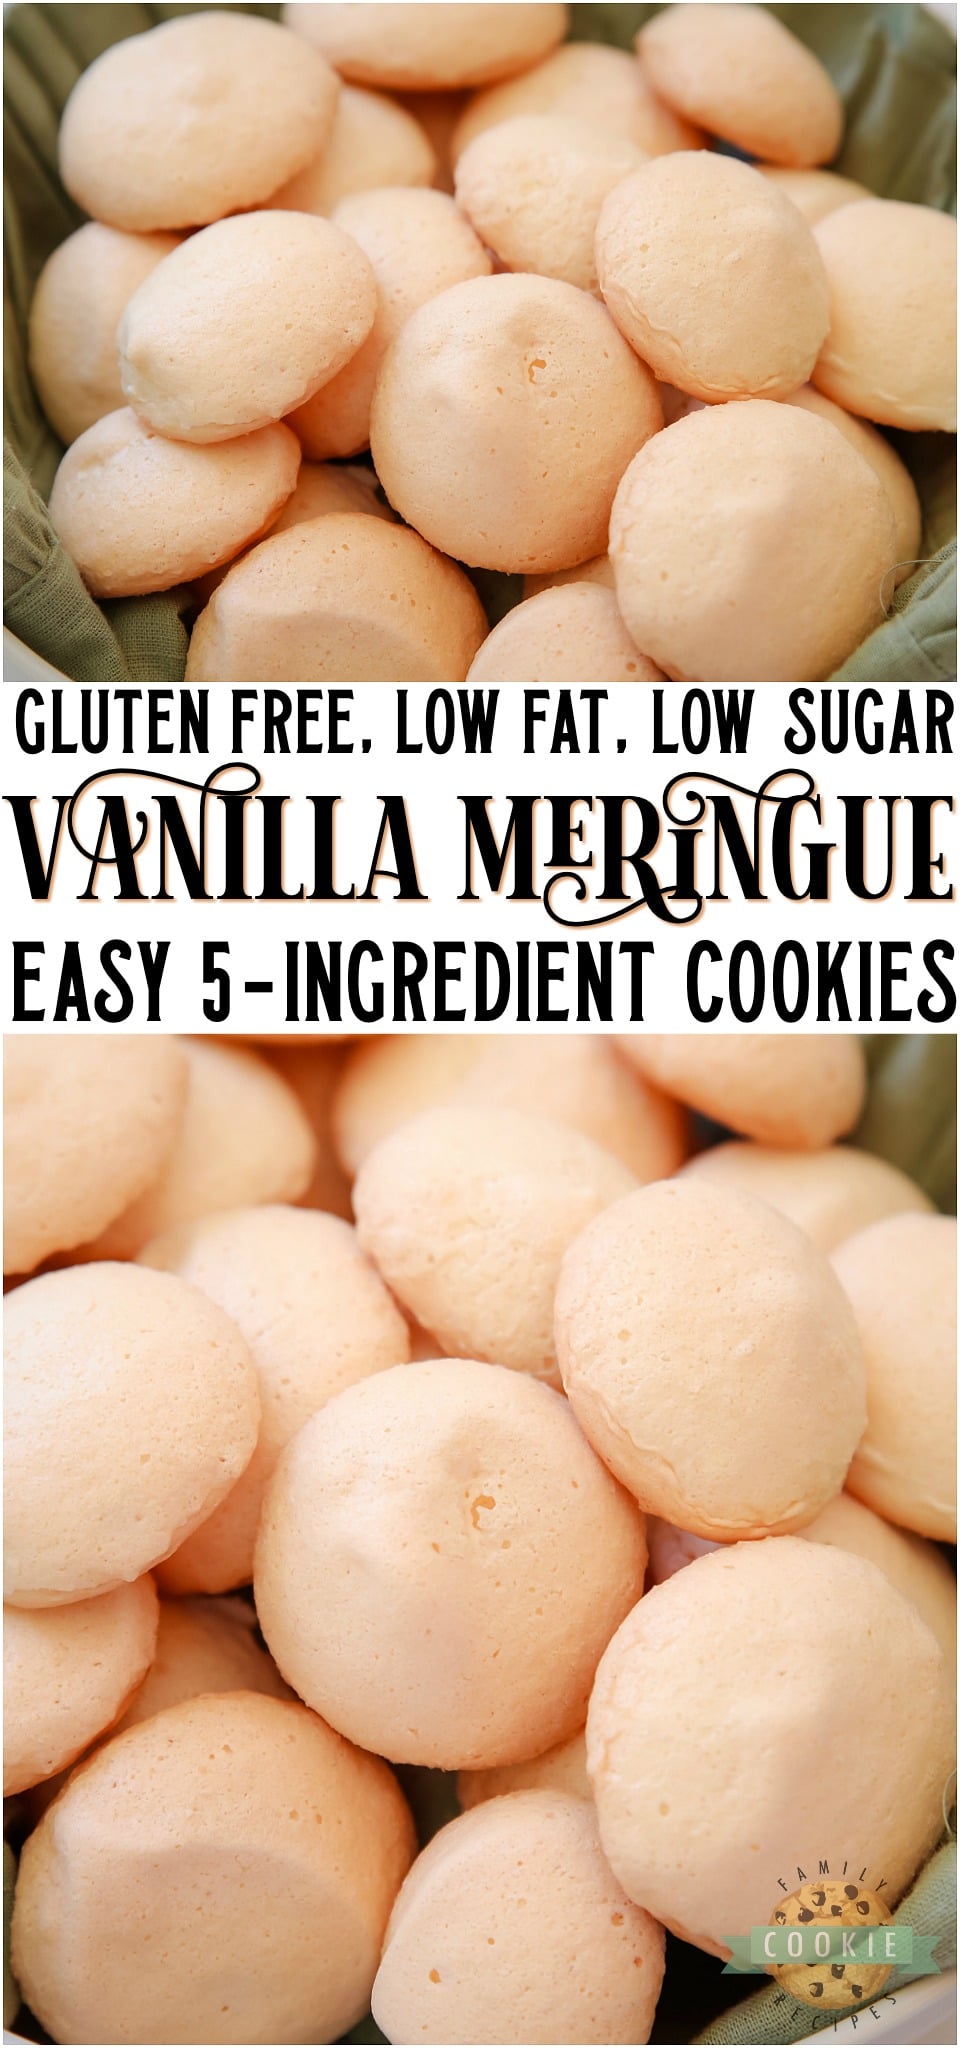 Easy Vanilla Meringue Cookies made with just 5 ingredients that you probably already have in your pantry! Simple gluten free, low fat, low sugar meringue cookie recipe flavored with vanilla extract for a sweet, crisp and chewy treat. #meringue #vanilla #cookies #lowfat #lowsugar #glutenfree #baking #dessert recipe from FAMILY COOKIE RECIPES via @buttergirls